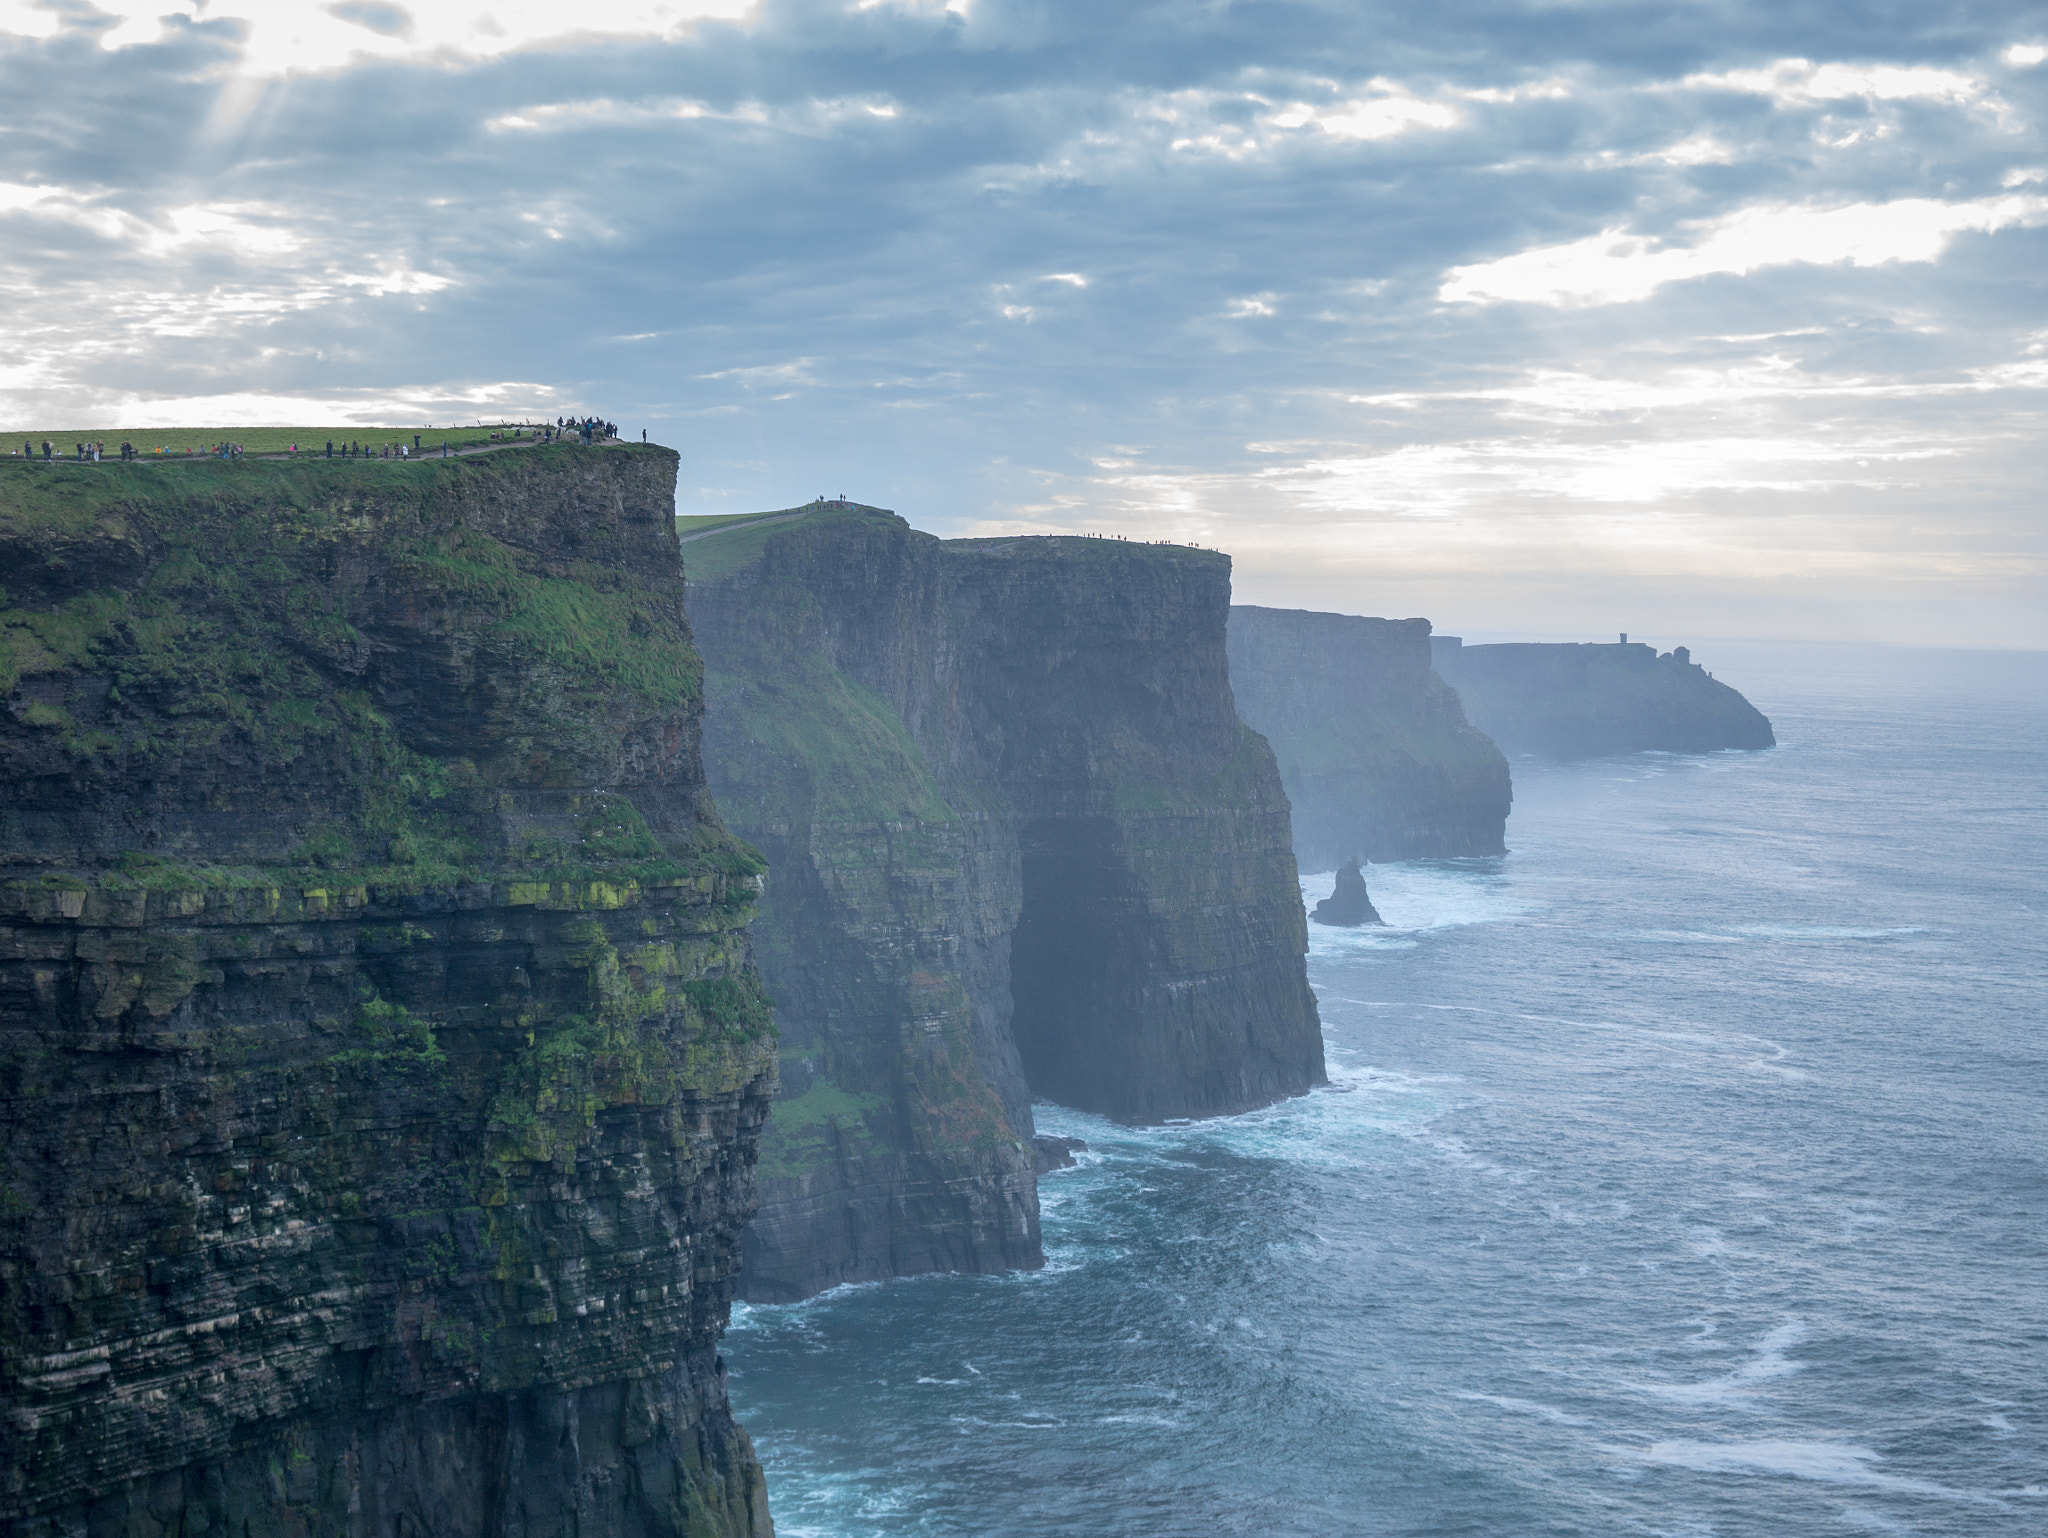 Panasonic Lumix DMC-GX85 (Lumix DMC-GX80 / Lumix DMC-GX7 Mark II) sample photo. Cliffs of moher, county clare, ireland photography